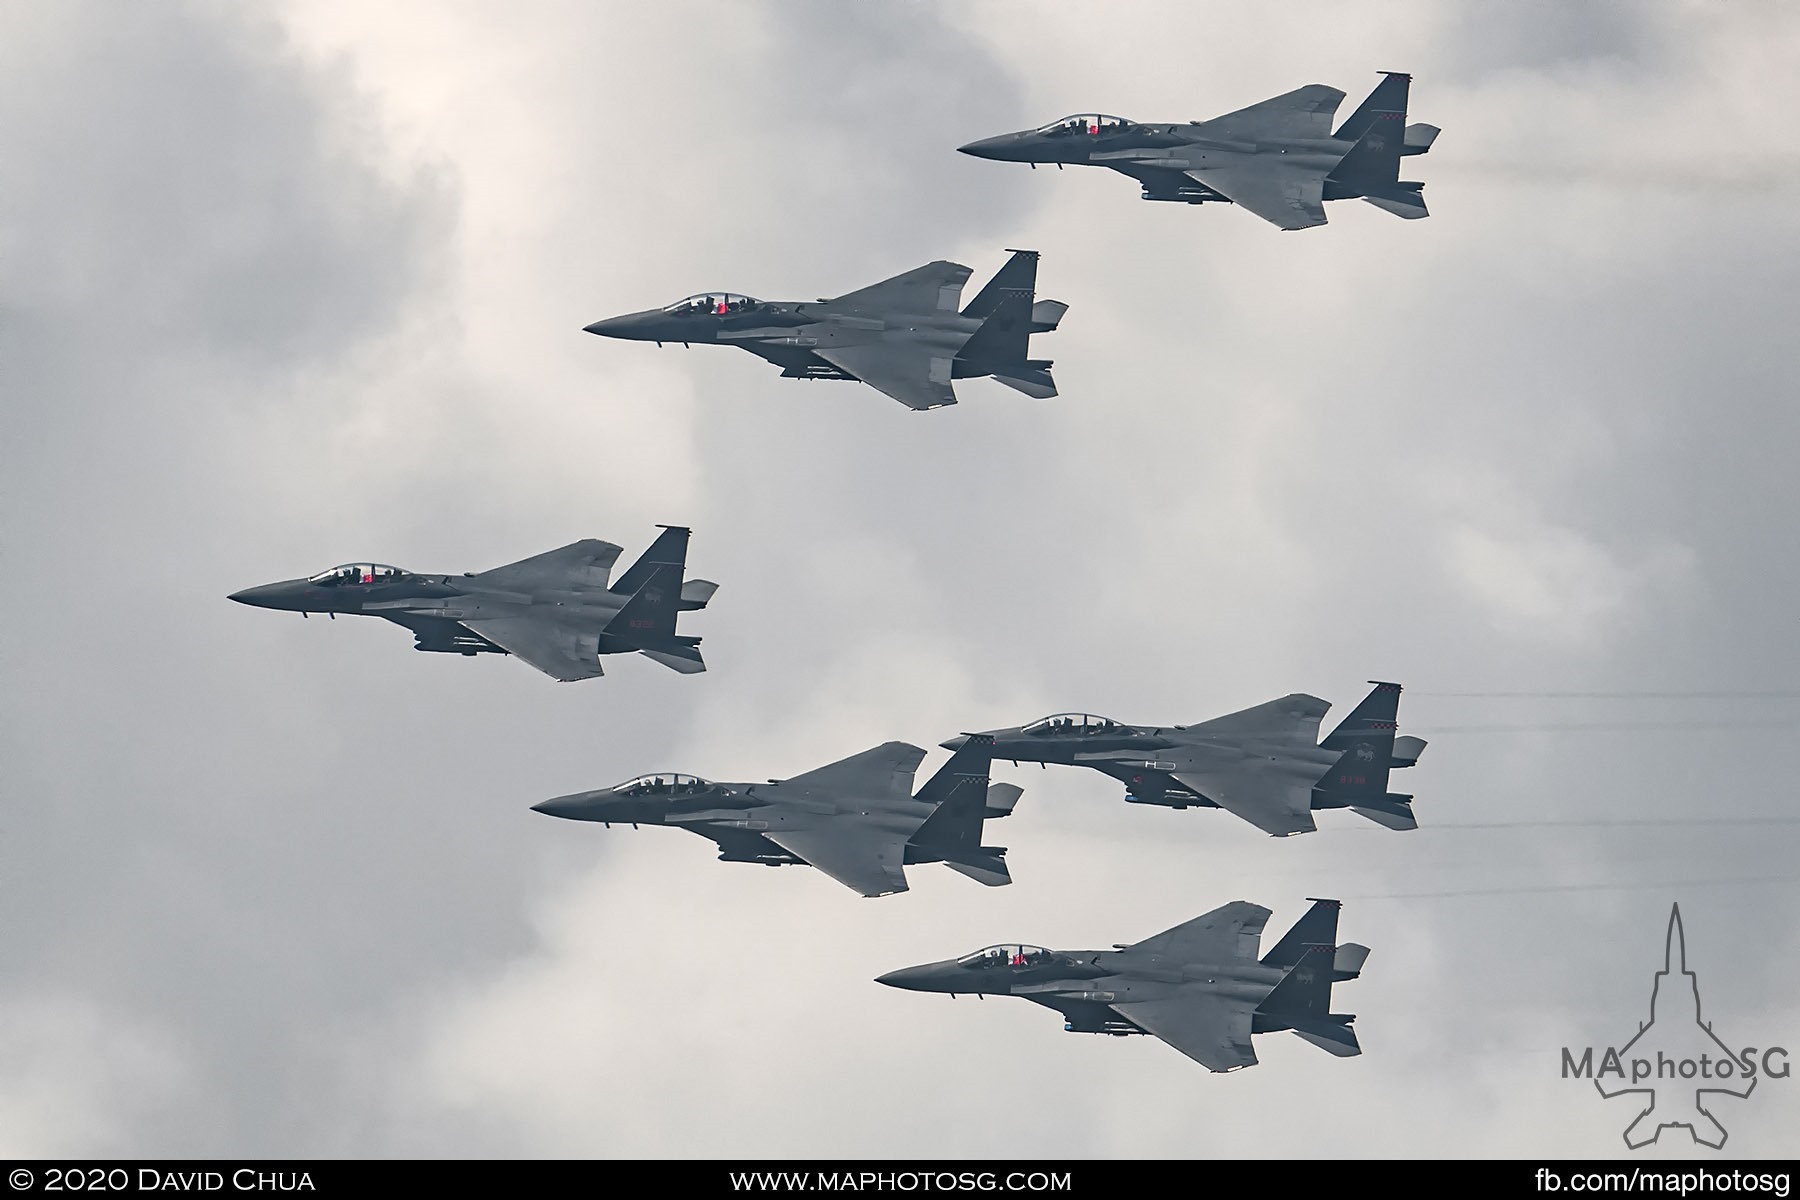 The Roar of Unity flight consists of six F-15SGs from 142 and 149 Squadrons of the RSAF. Singapore flags can be seen in some of the cockpits.